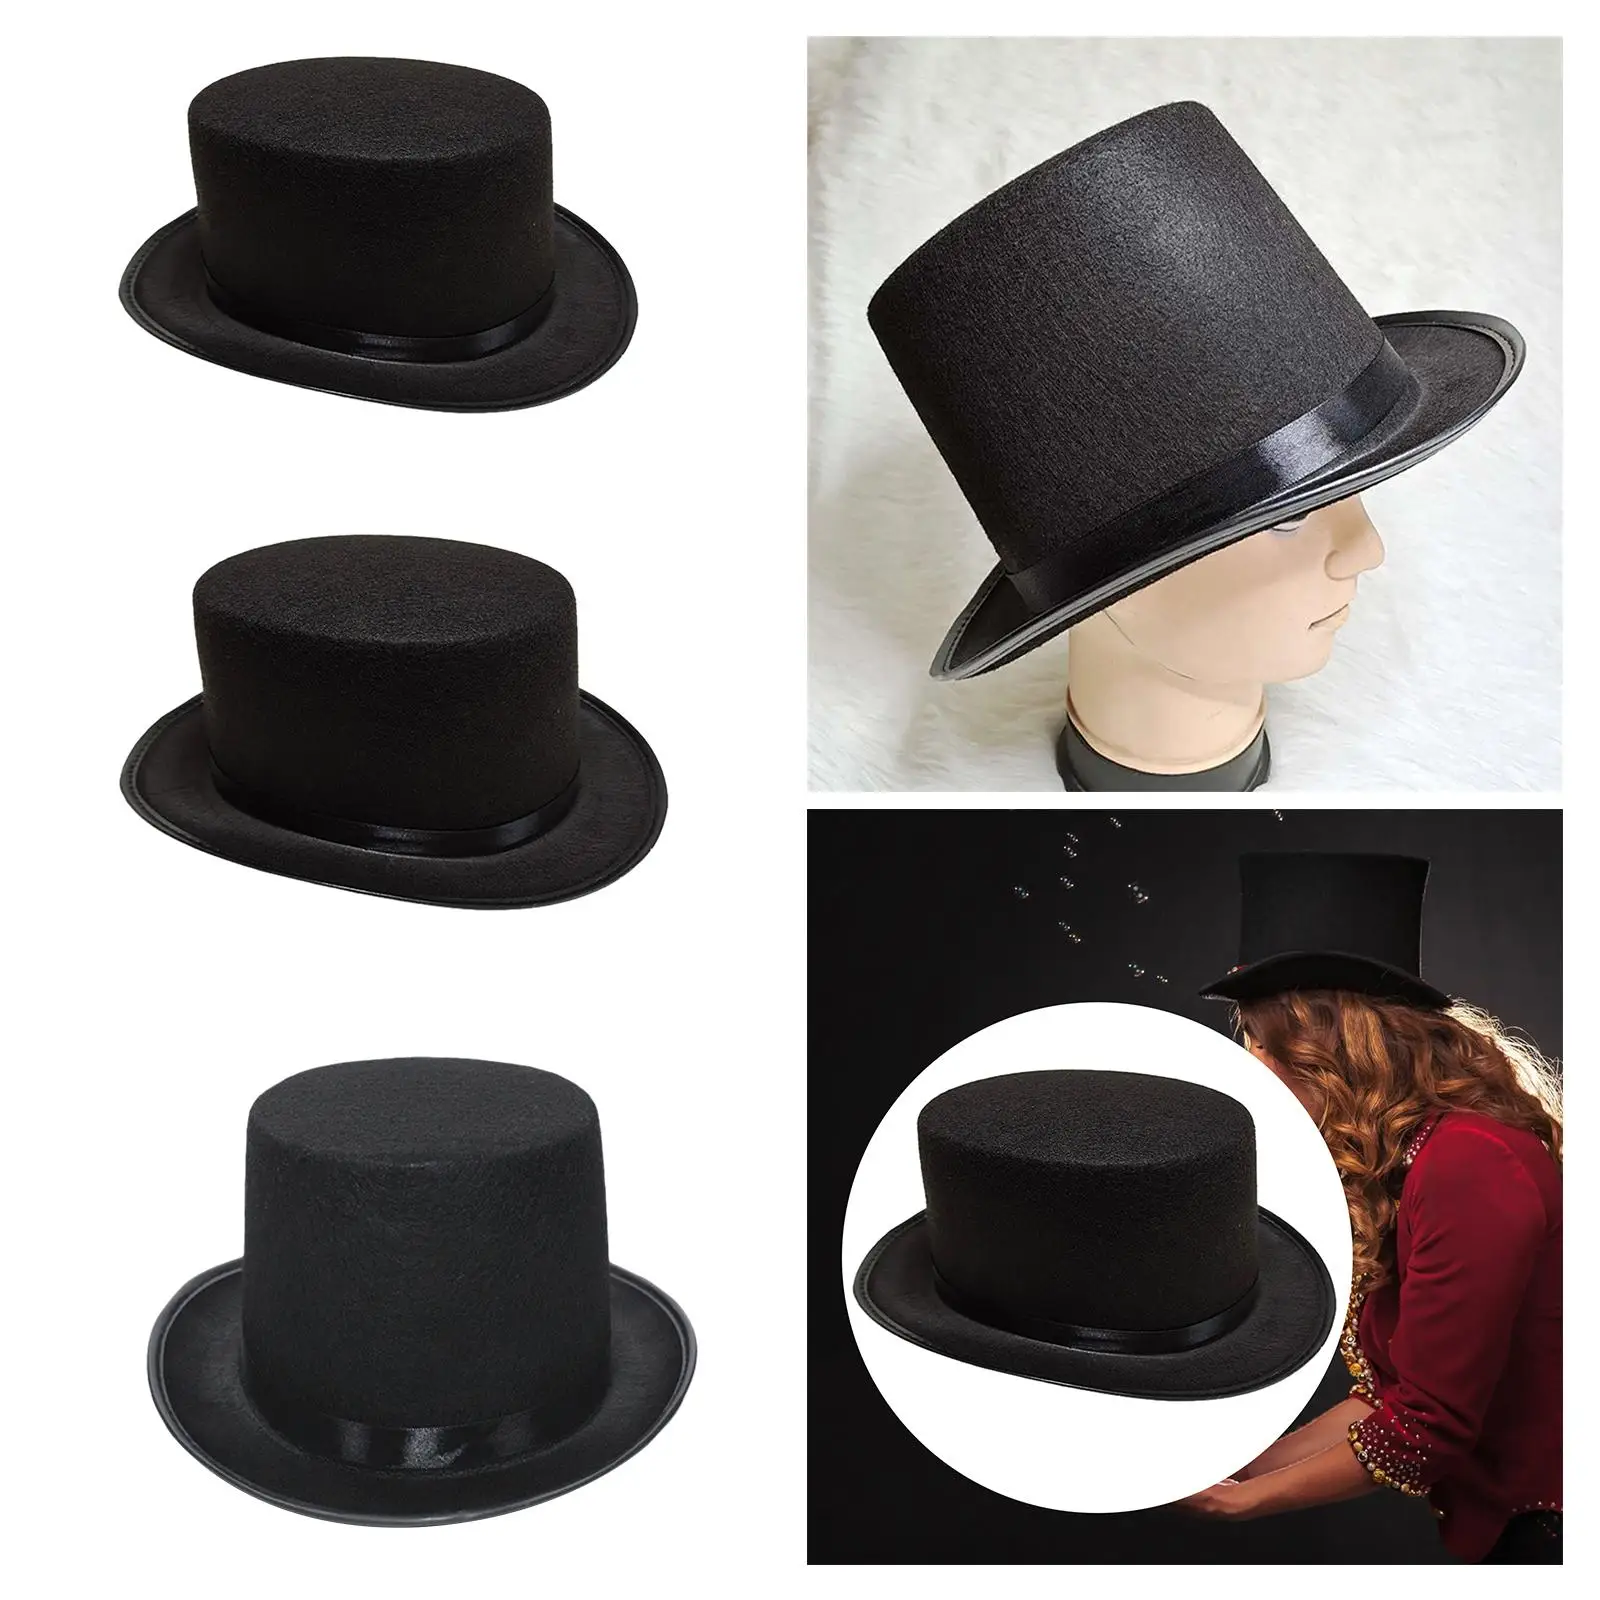 Black Felt Top Hat for Women Men Fashion Jazz Hat Magician Top Hat for Role Playing Masquerade Themed Parties Cosplay Nightclub